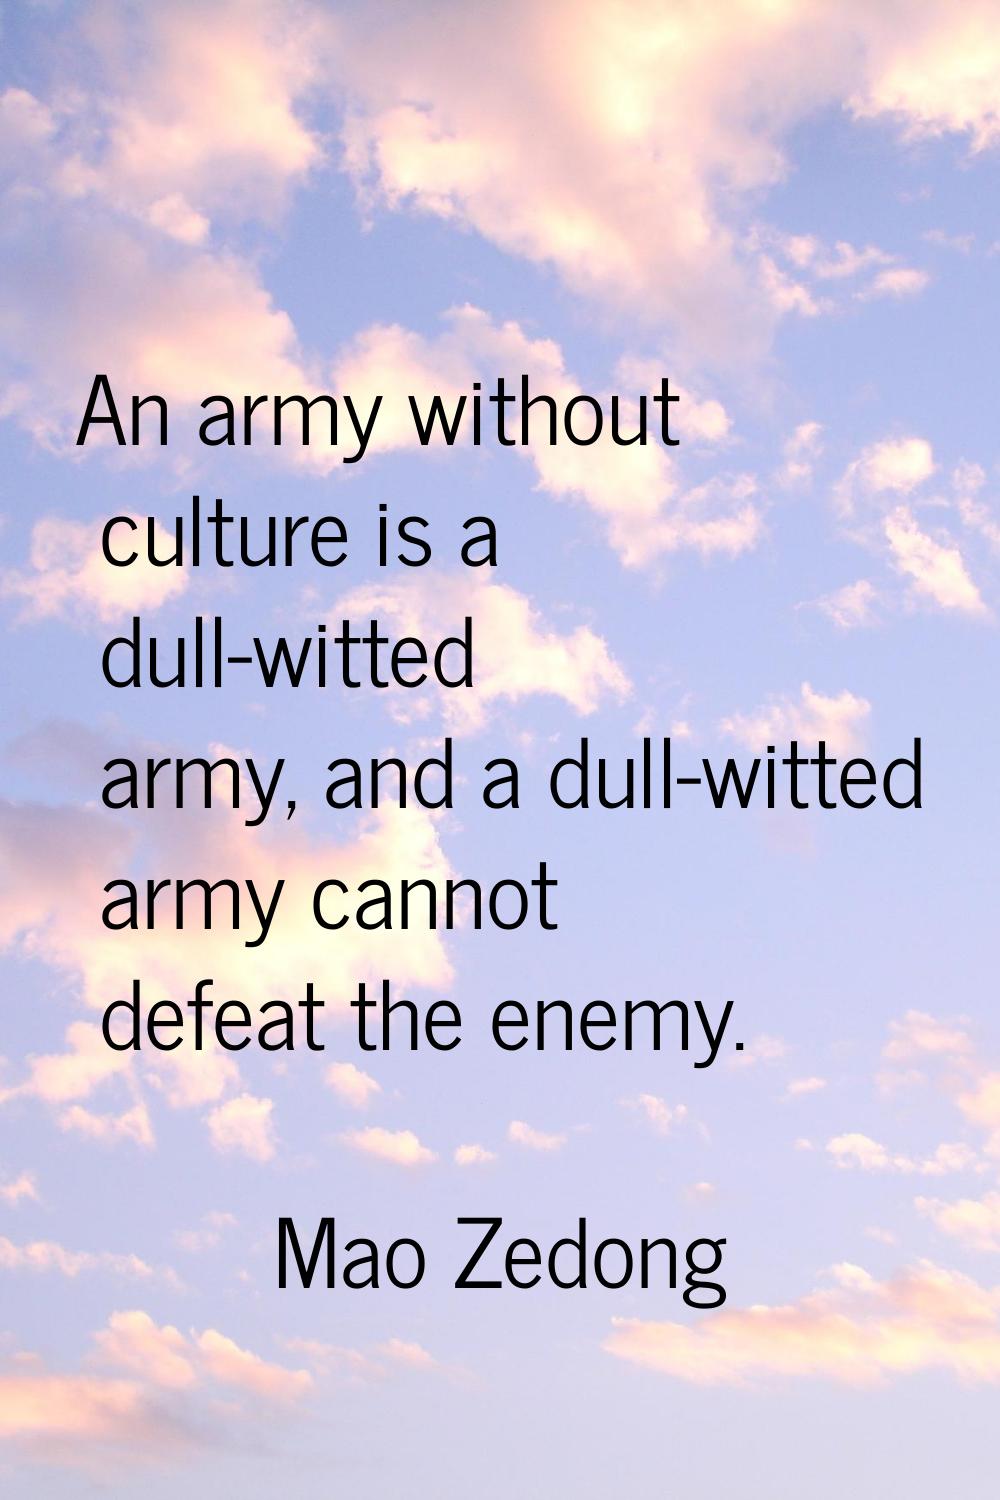 An army without culture is a dull-witted army, and a dull-witted army cannot defeat the enemy.